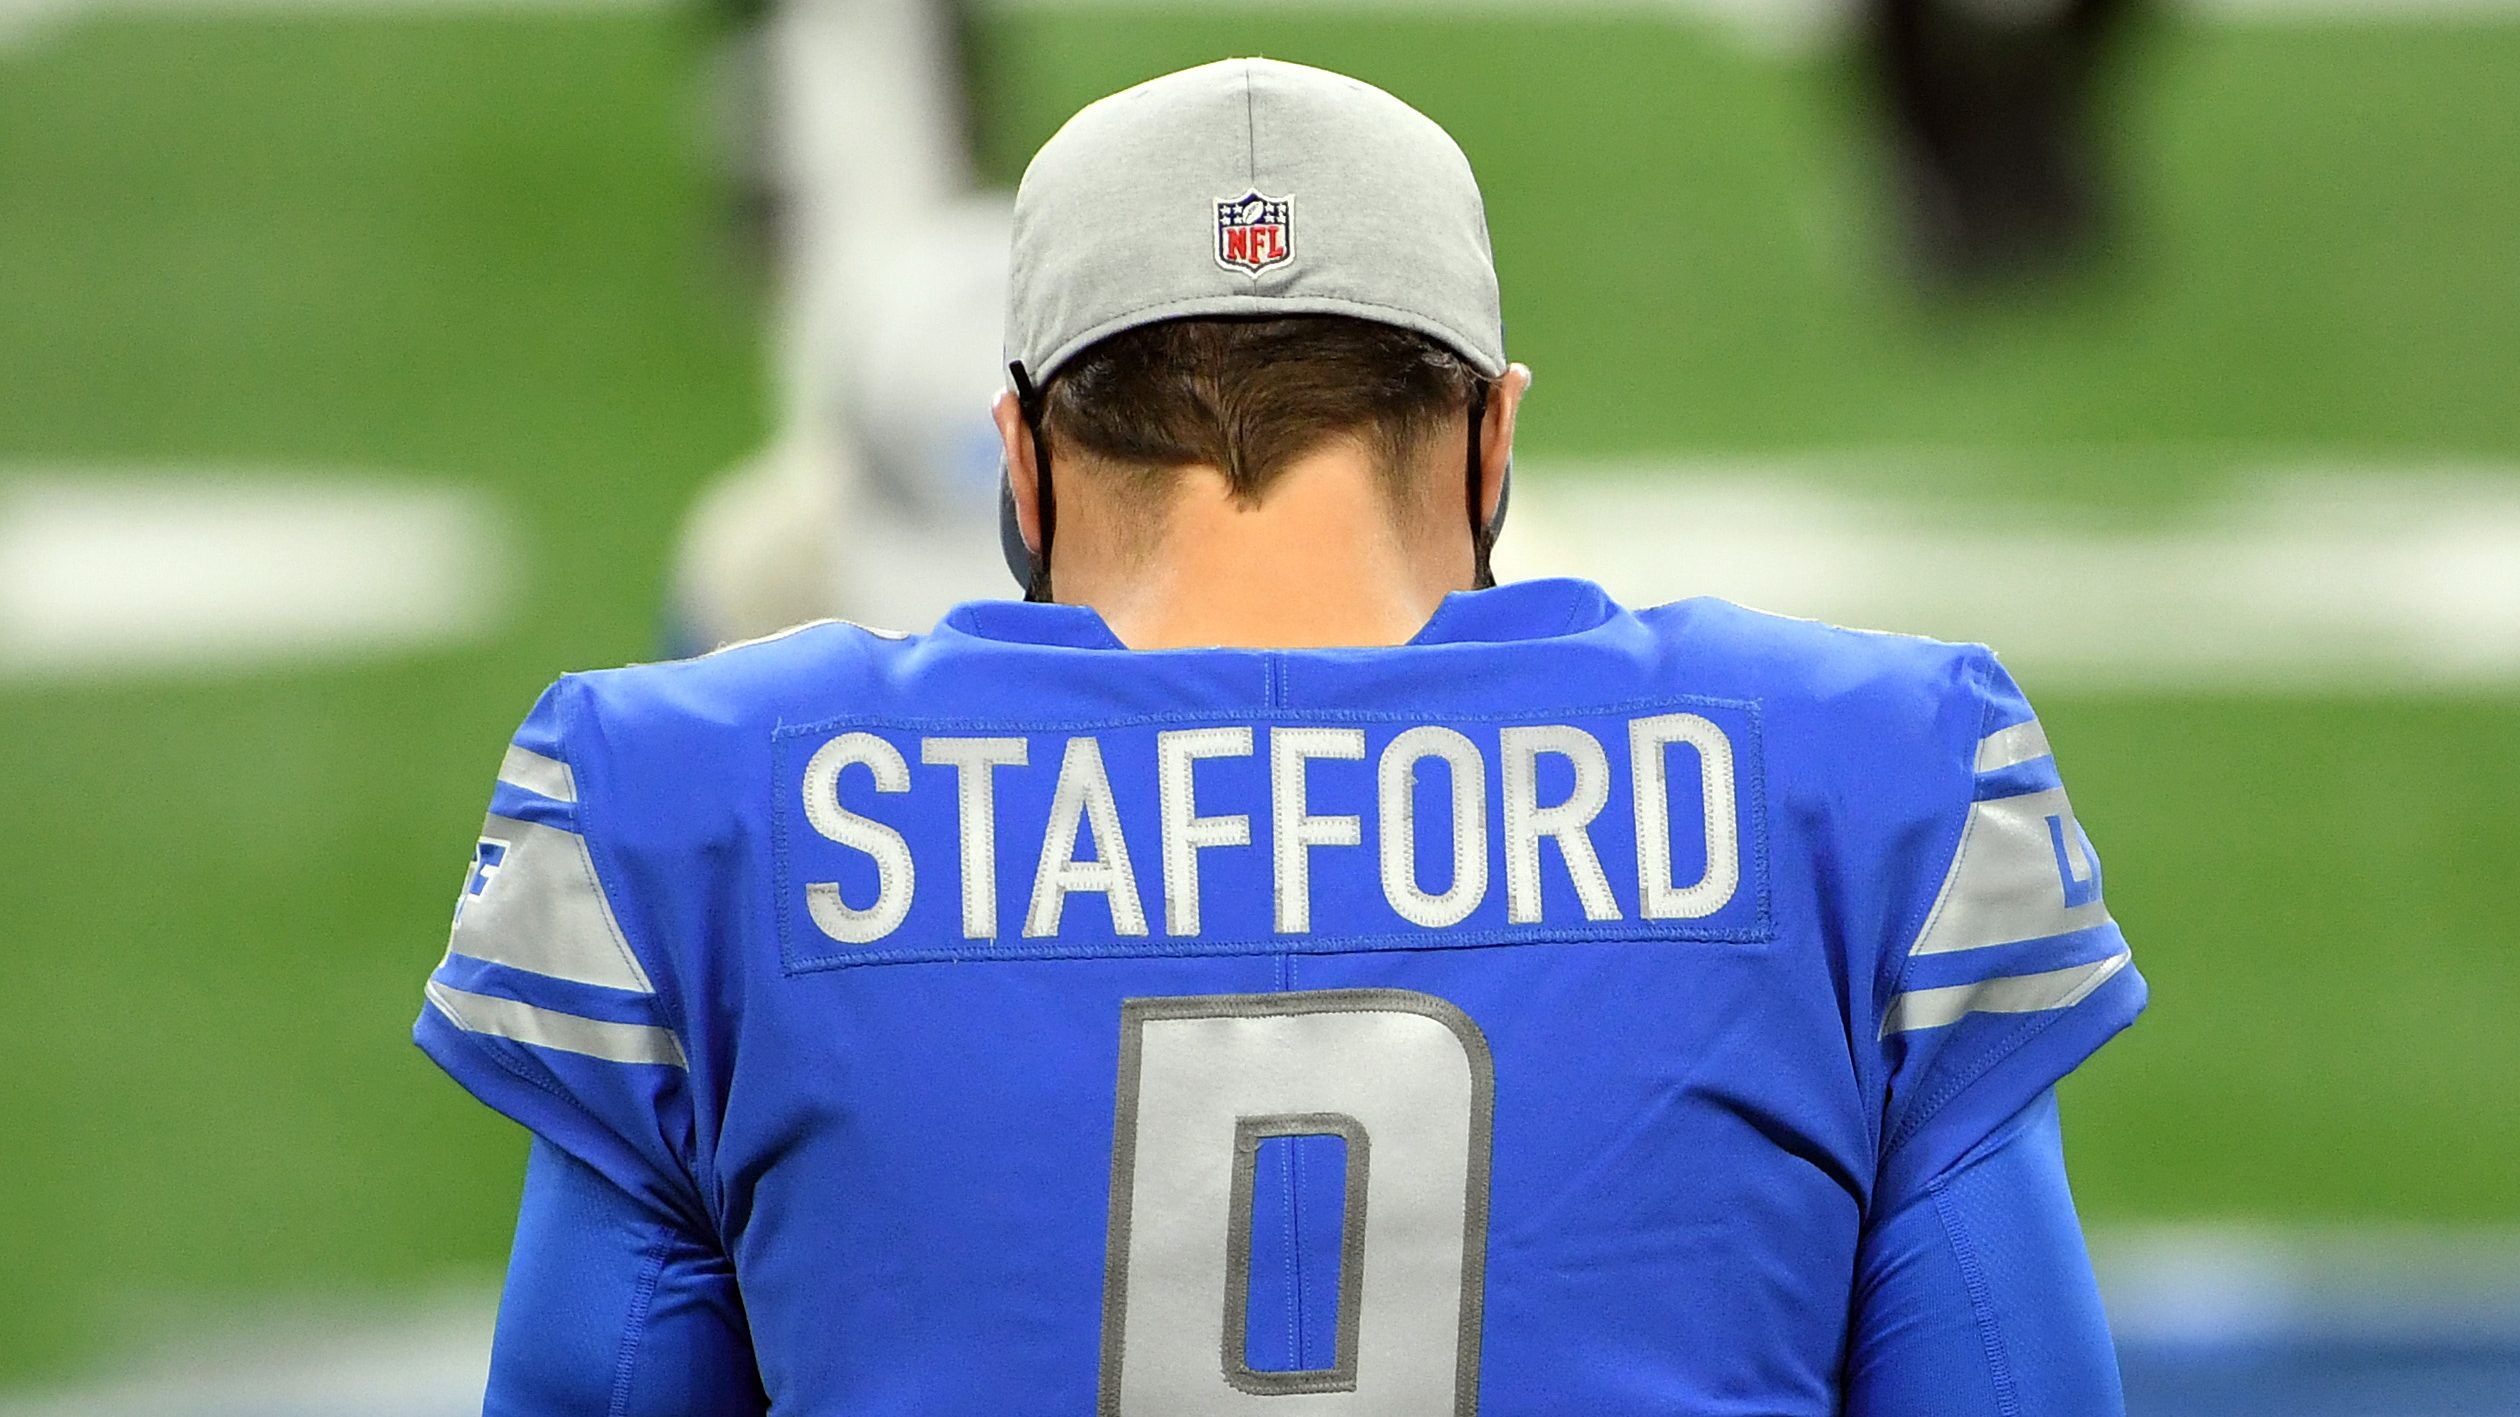 Matthew Stafford, quarterback of the Detroit Lions, stands on the field before the game against the Green Bay Packers at Ford Field on December 13, 2020 in Detroit, Michigan. Stafford has his back to the camera, all that's visible is his hat and his jersey.